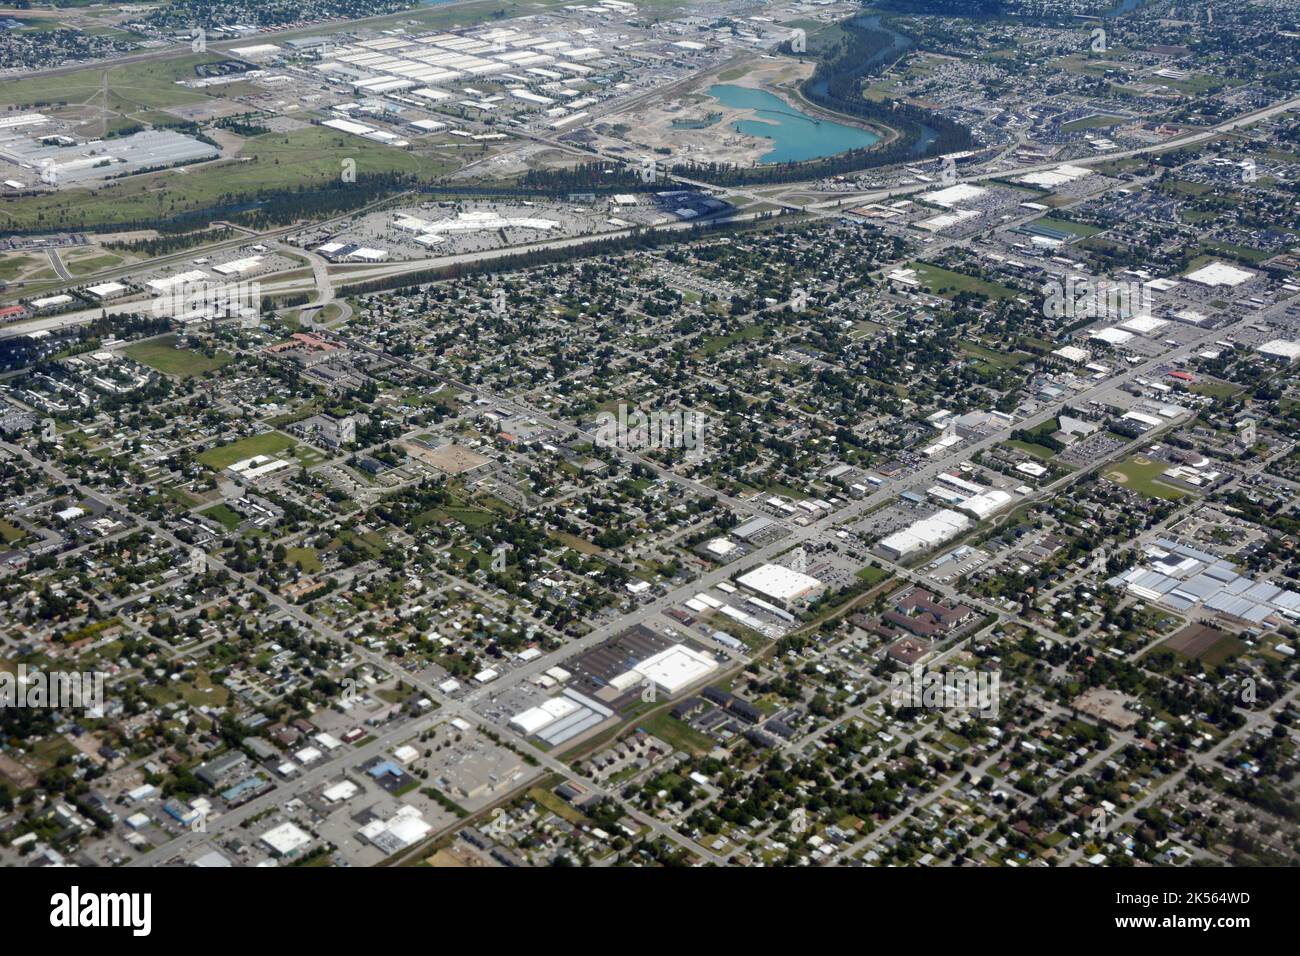 Aerial view of commercial and residential areas on Sprague Ave. on the outskirts of the city of Spokane, northeastern Washington State, United States. Stock Photo